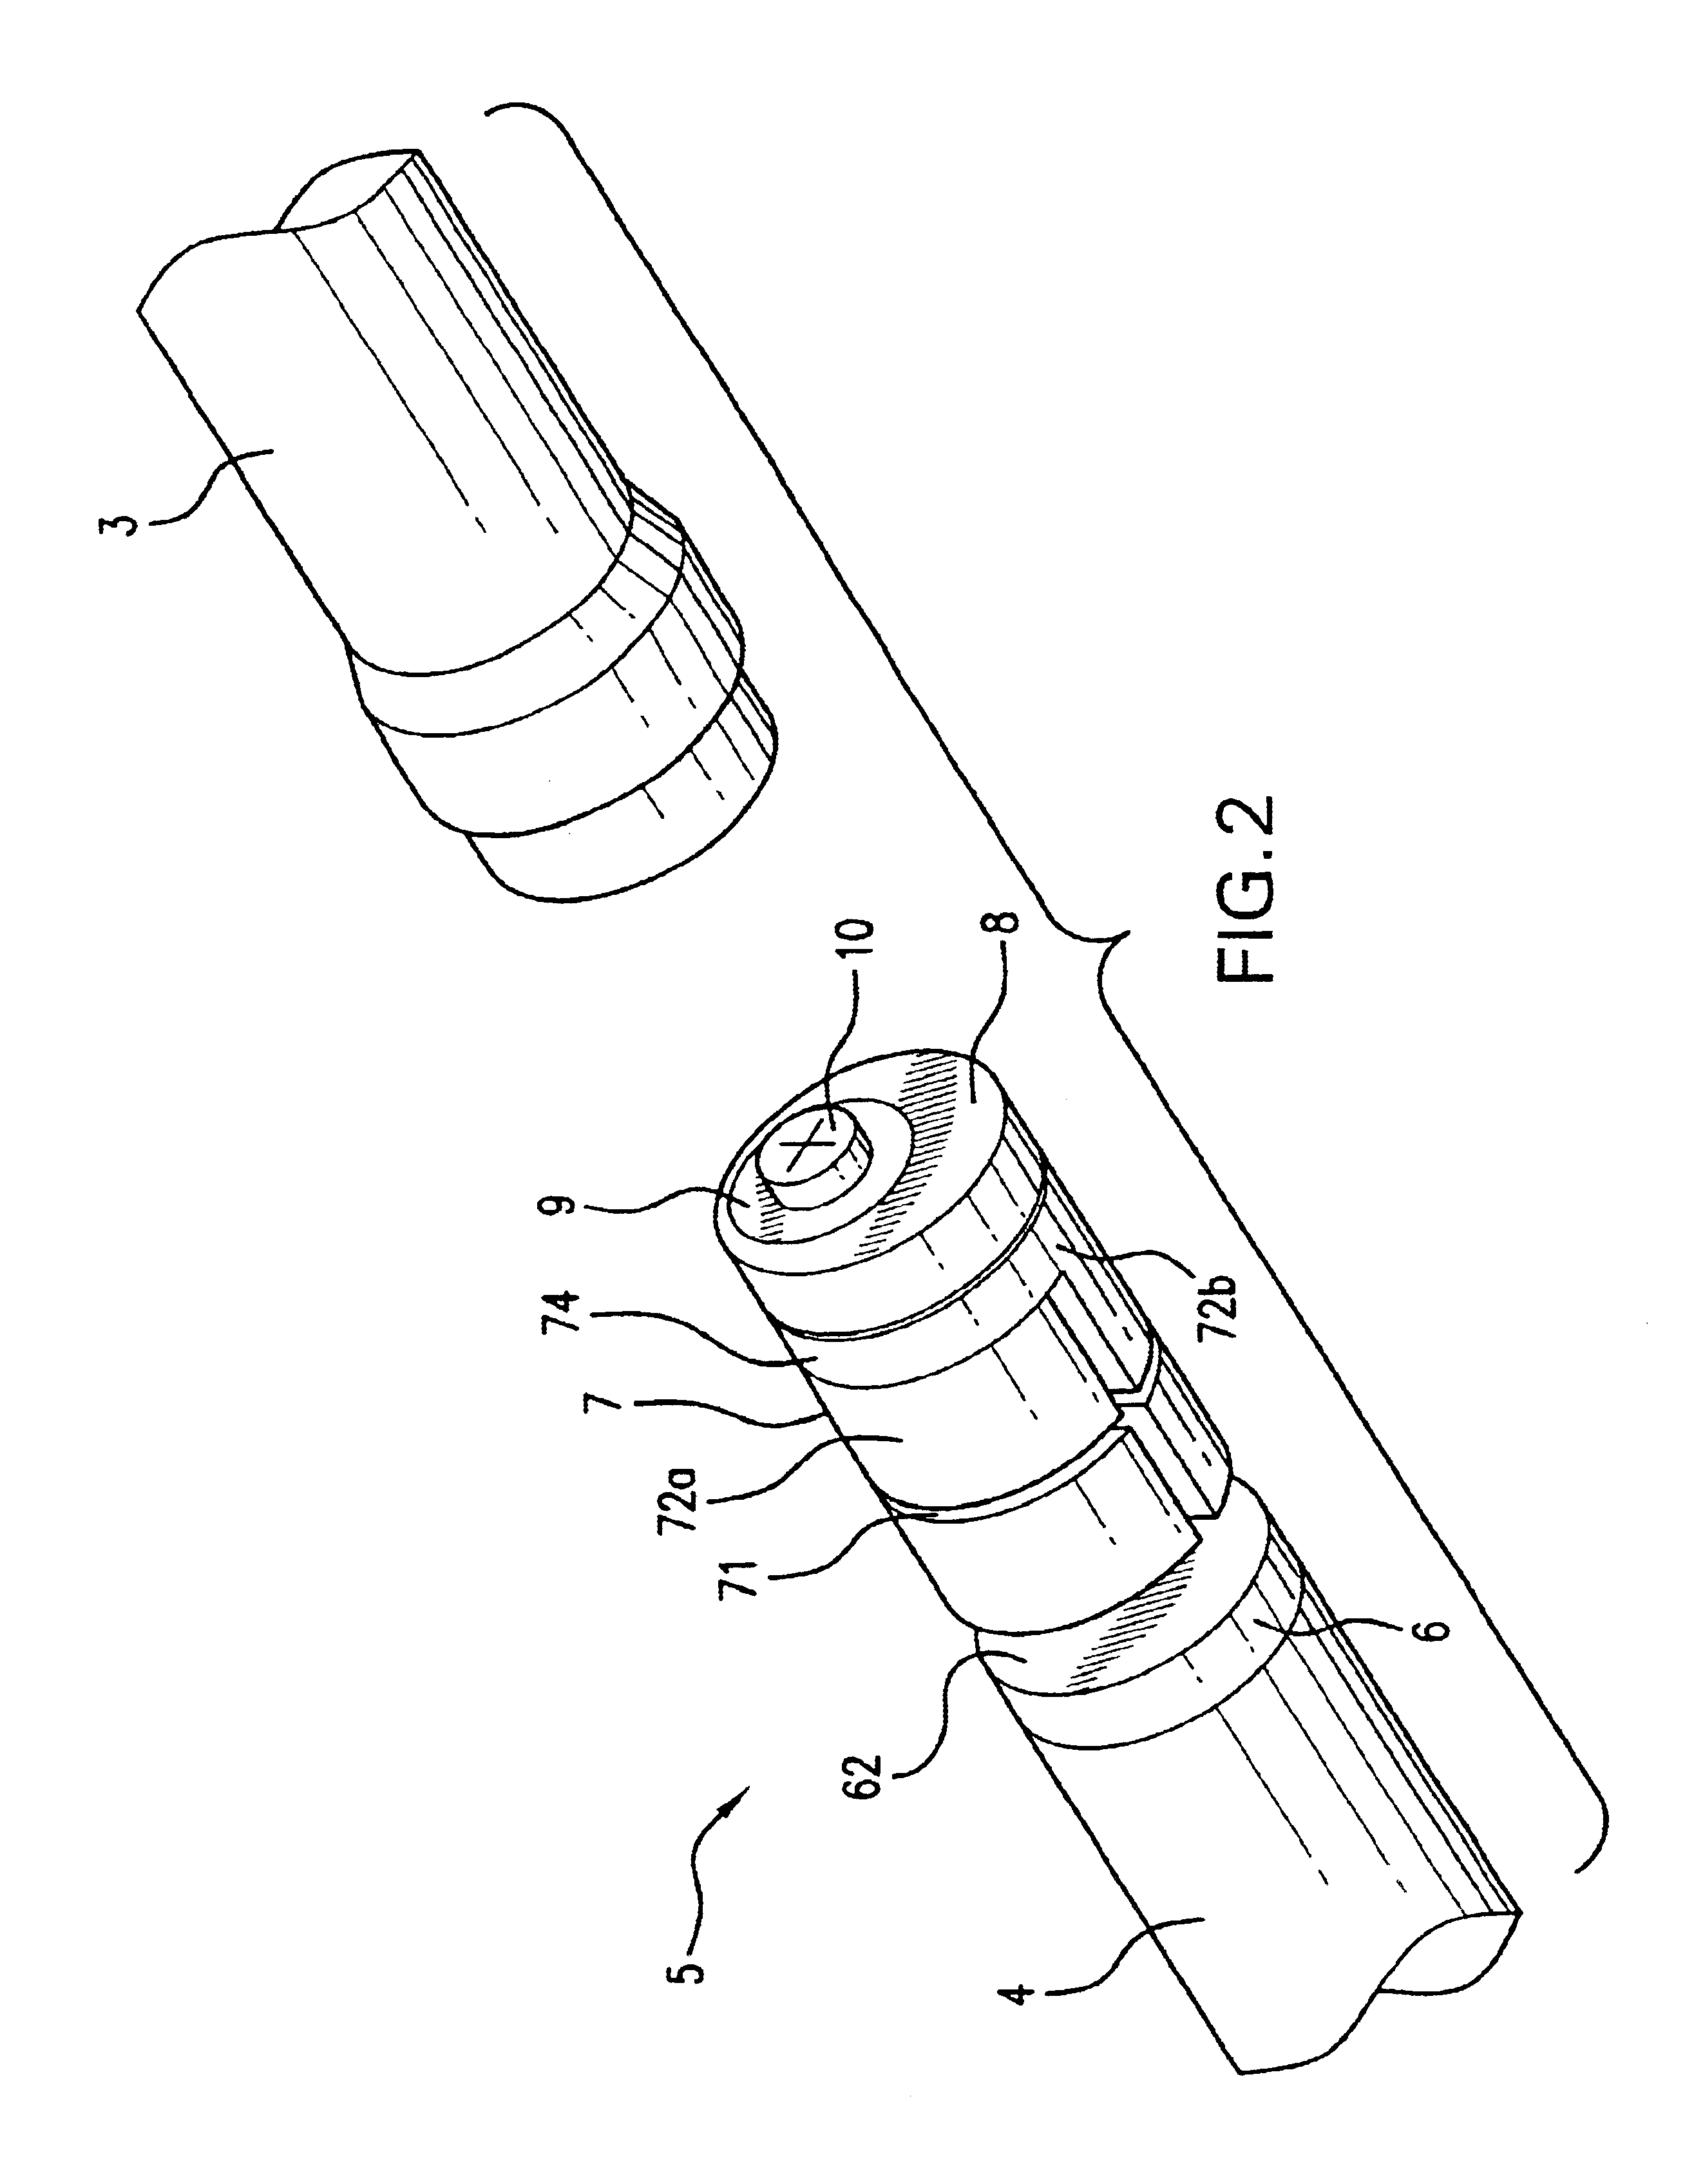 Stagelessly adjustable telescopic walking stick with a position retaining device